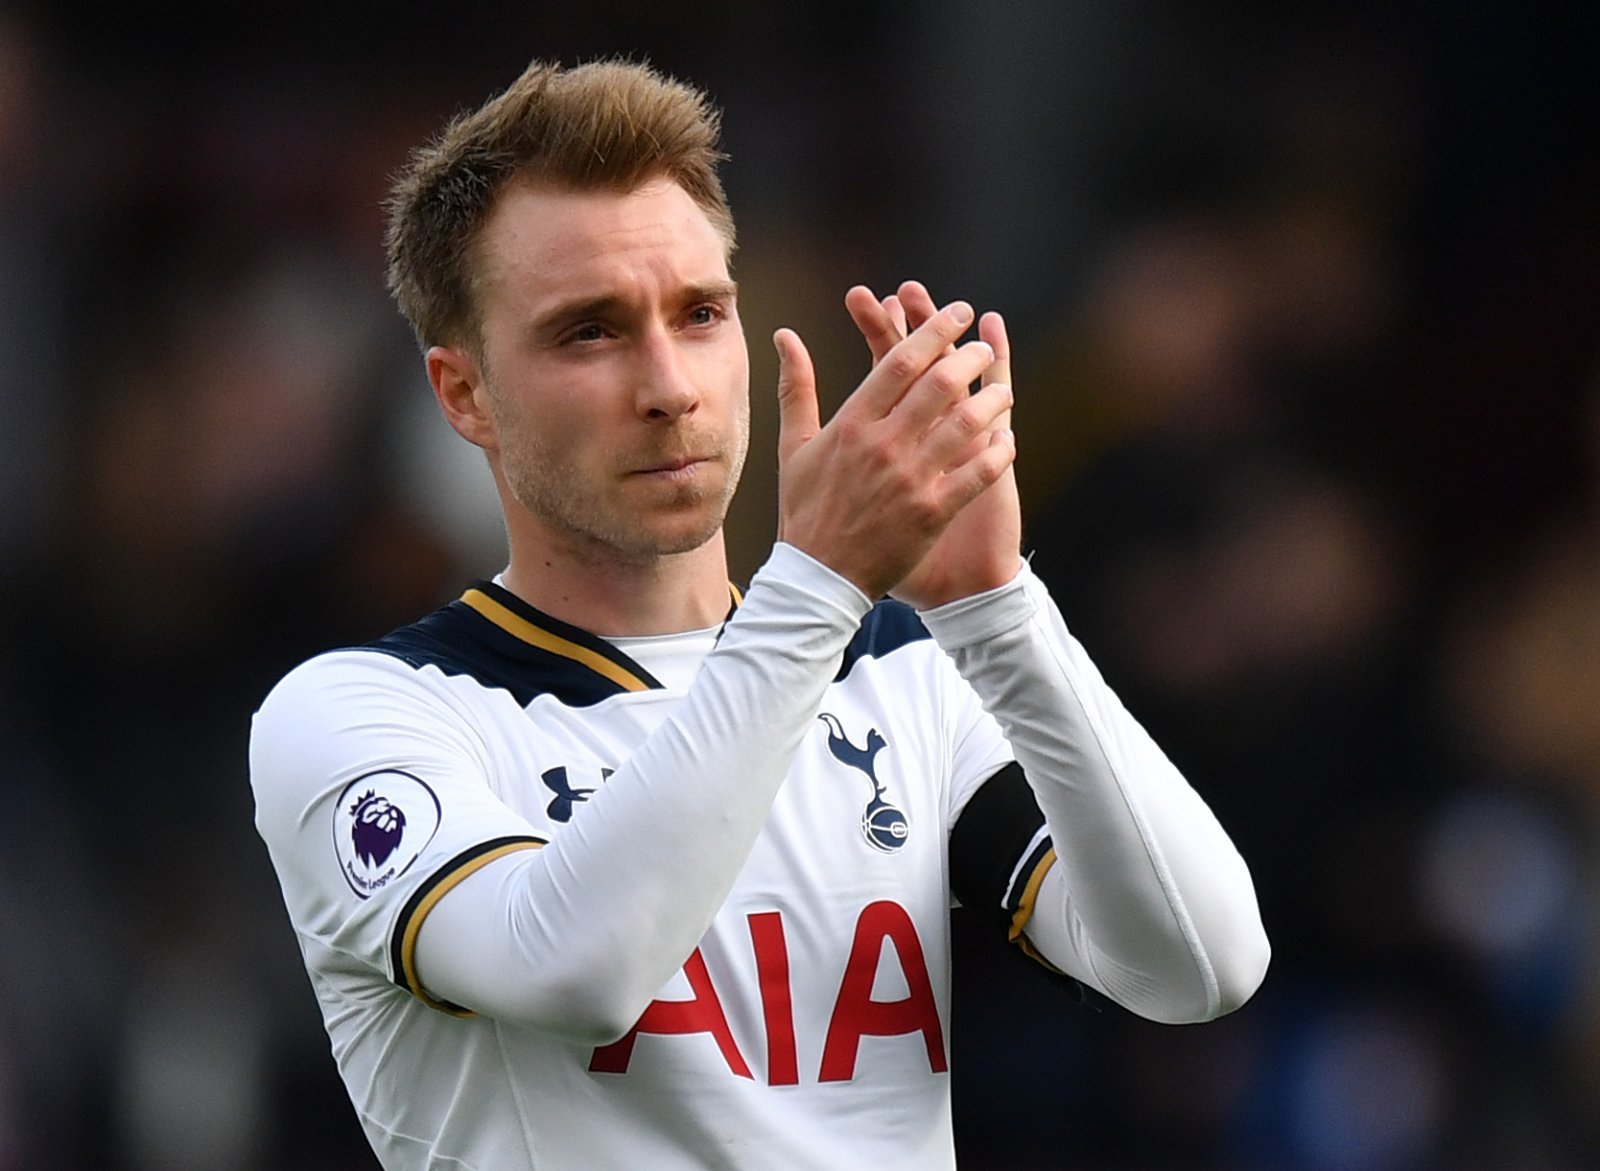 Tottenham’s Eriksen ready for next step claims former manager | Shoot